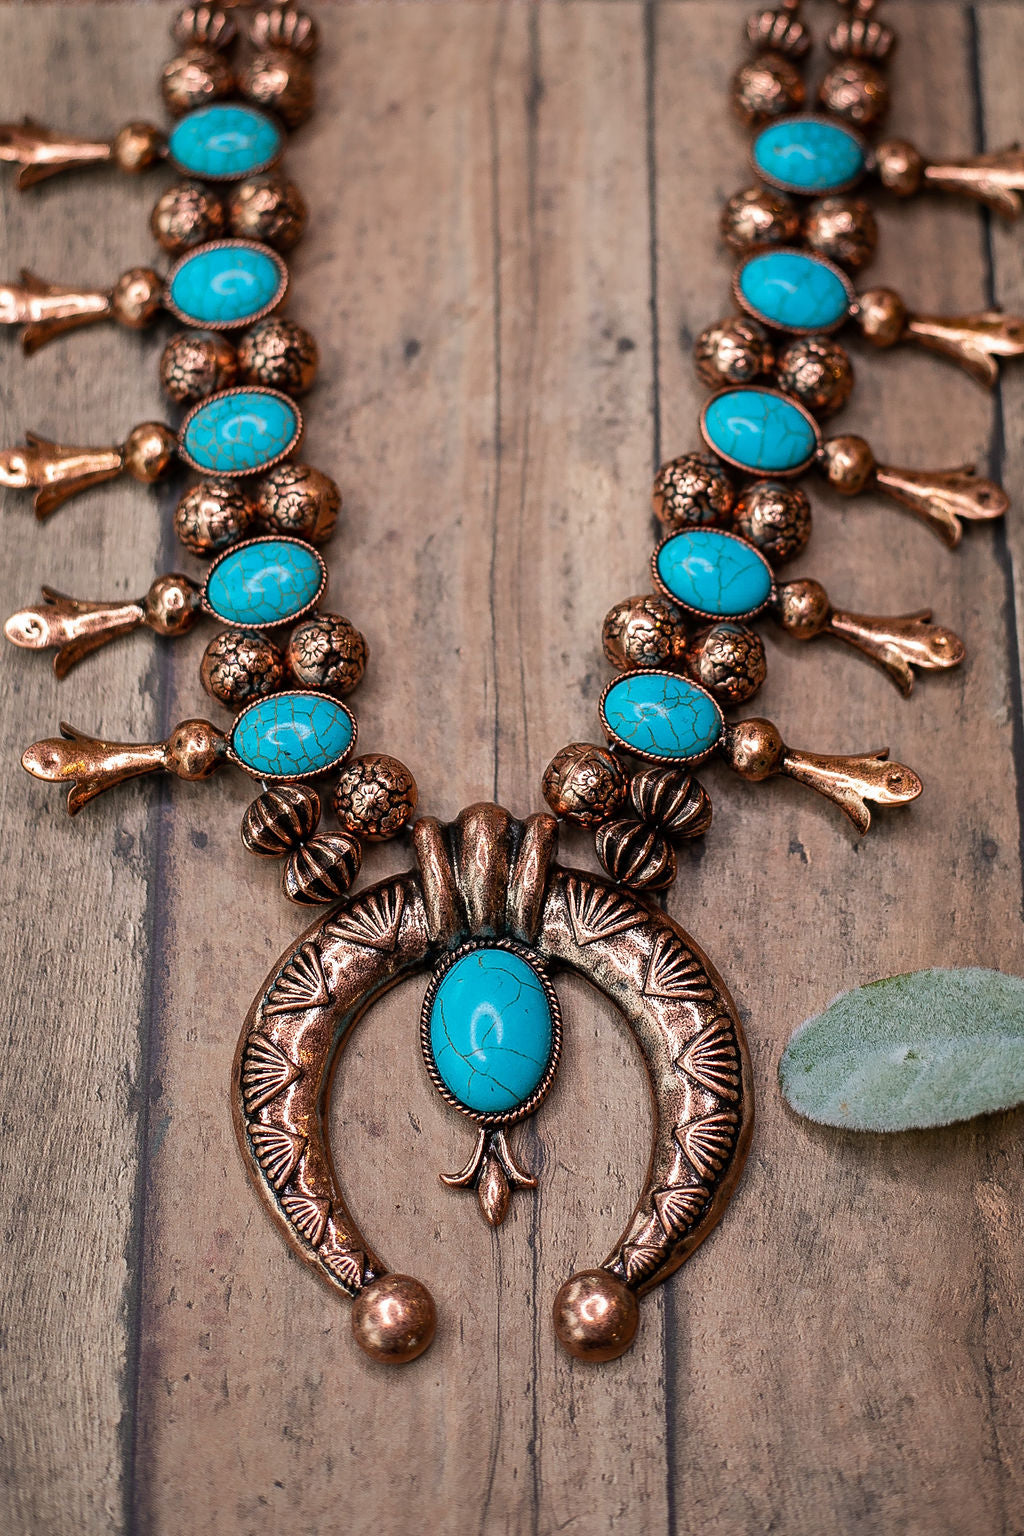 Copper Tone Squash Blossom Necklace with Turquoise Stones - Giddy Up Glamour Boutique